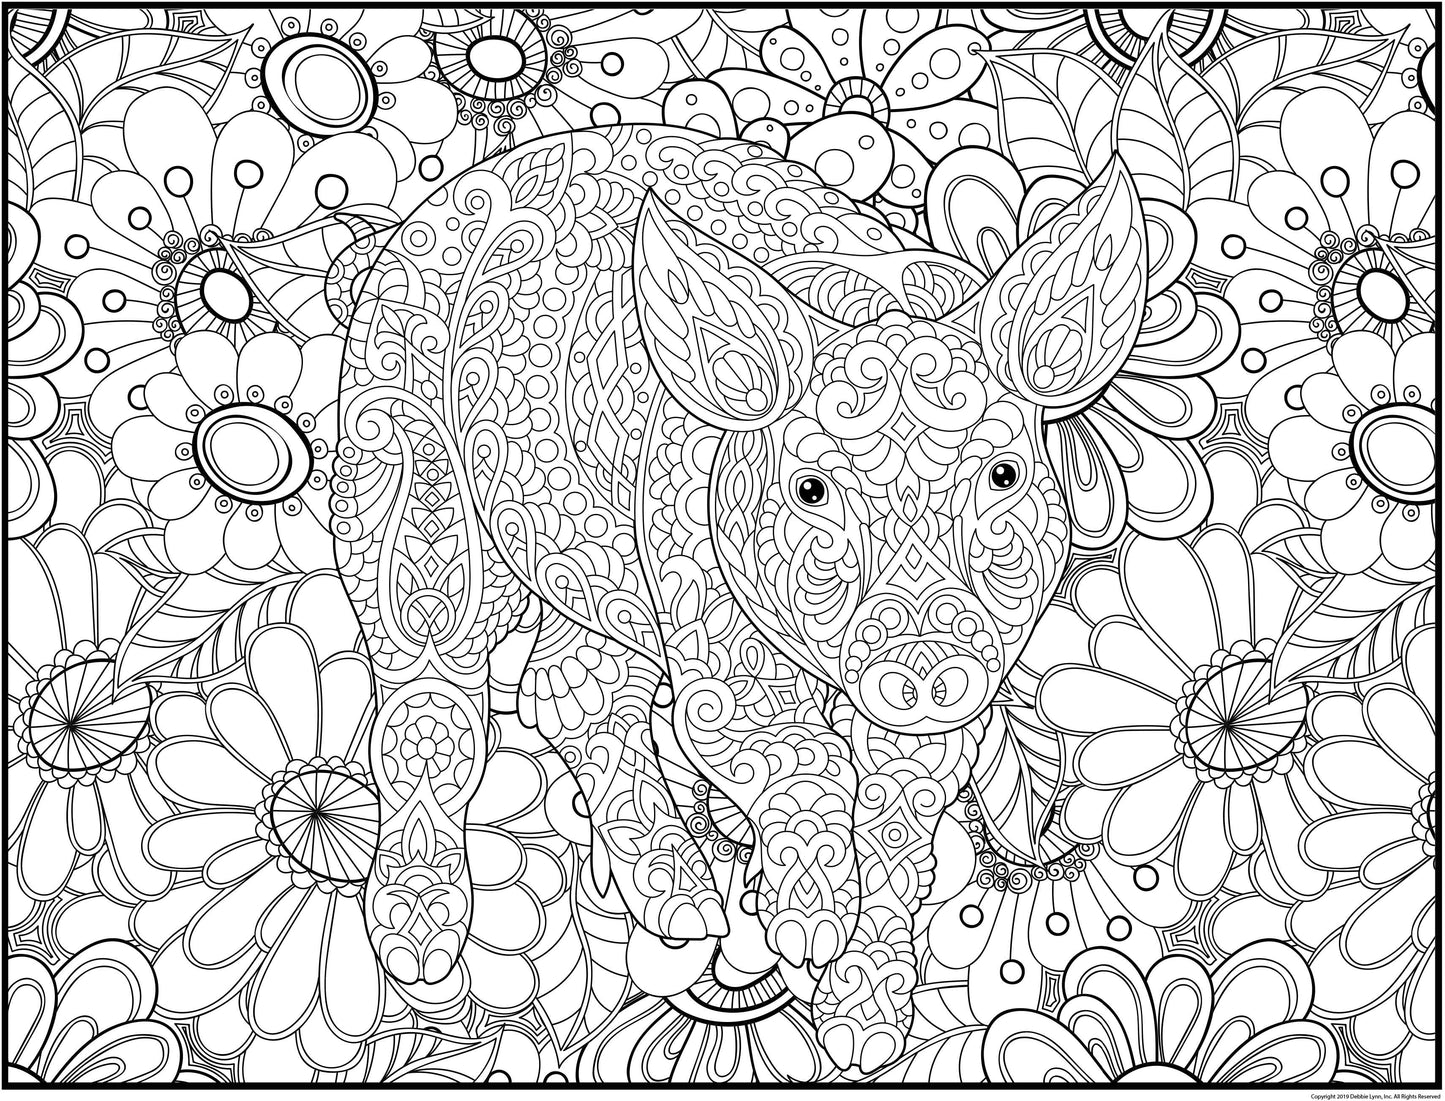 Pig Personalized Giant Coloring Poster 46"x60"